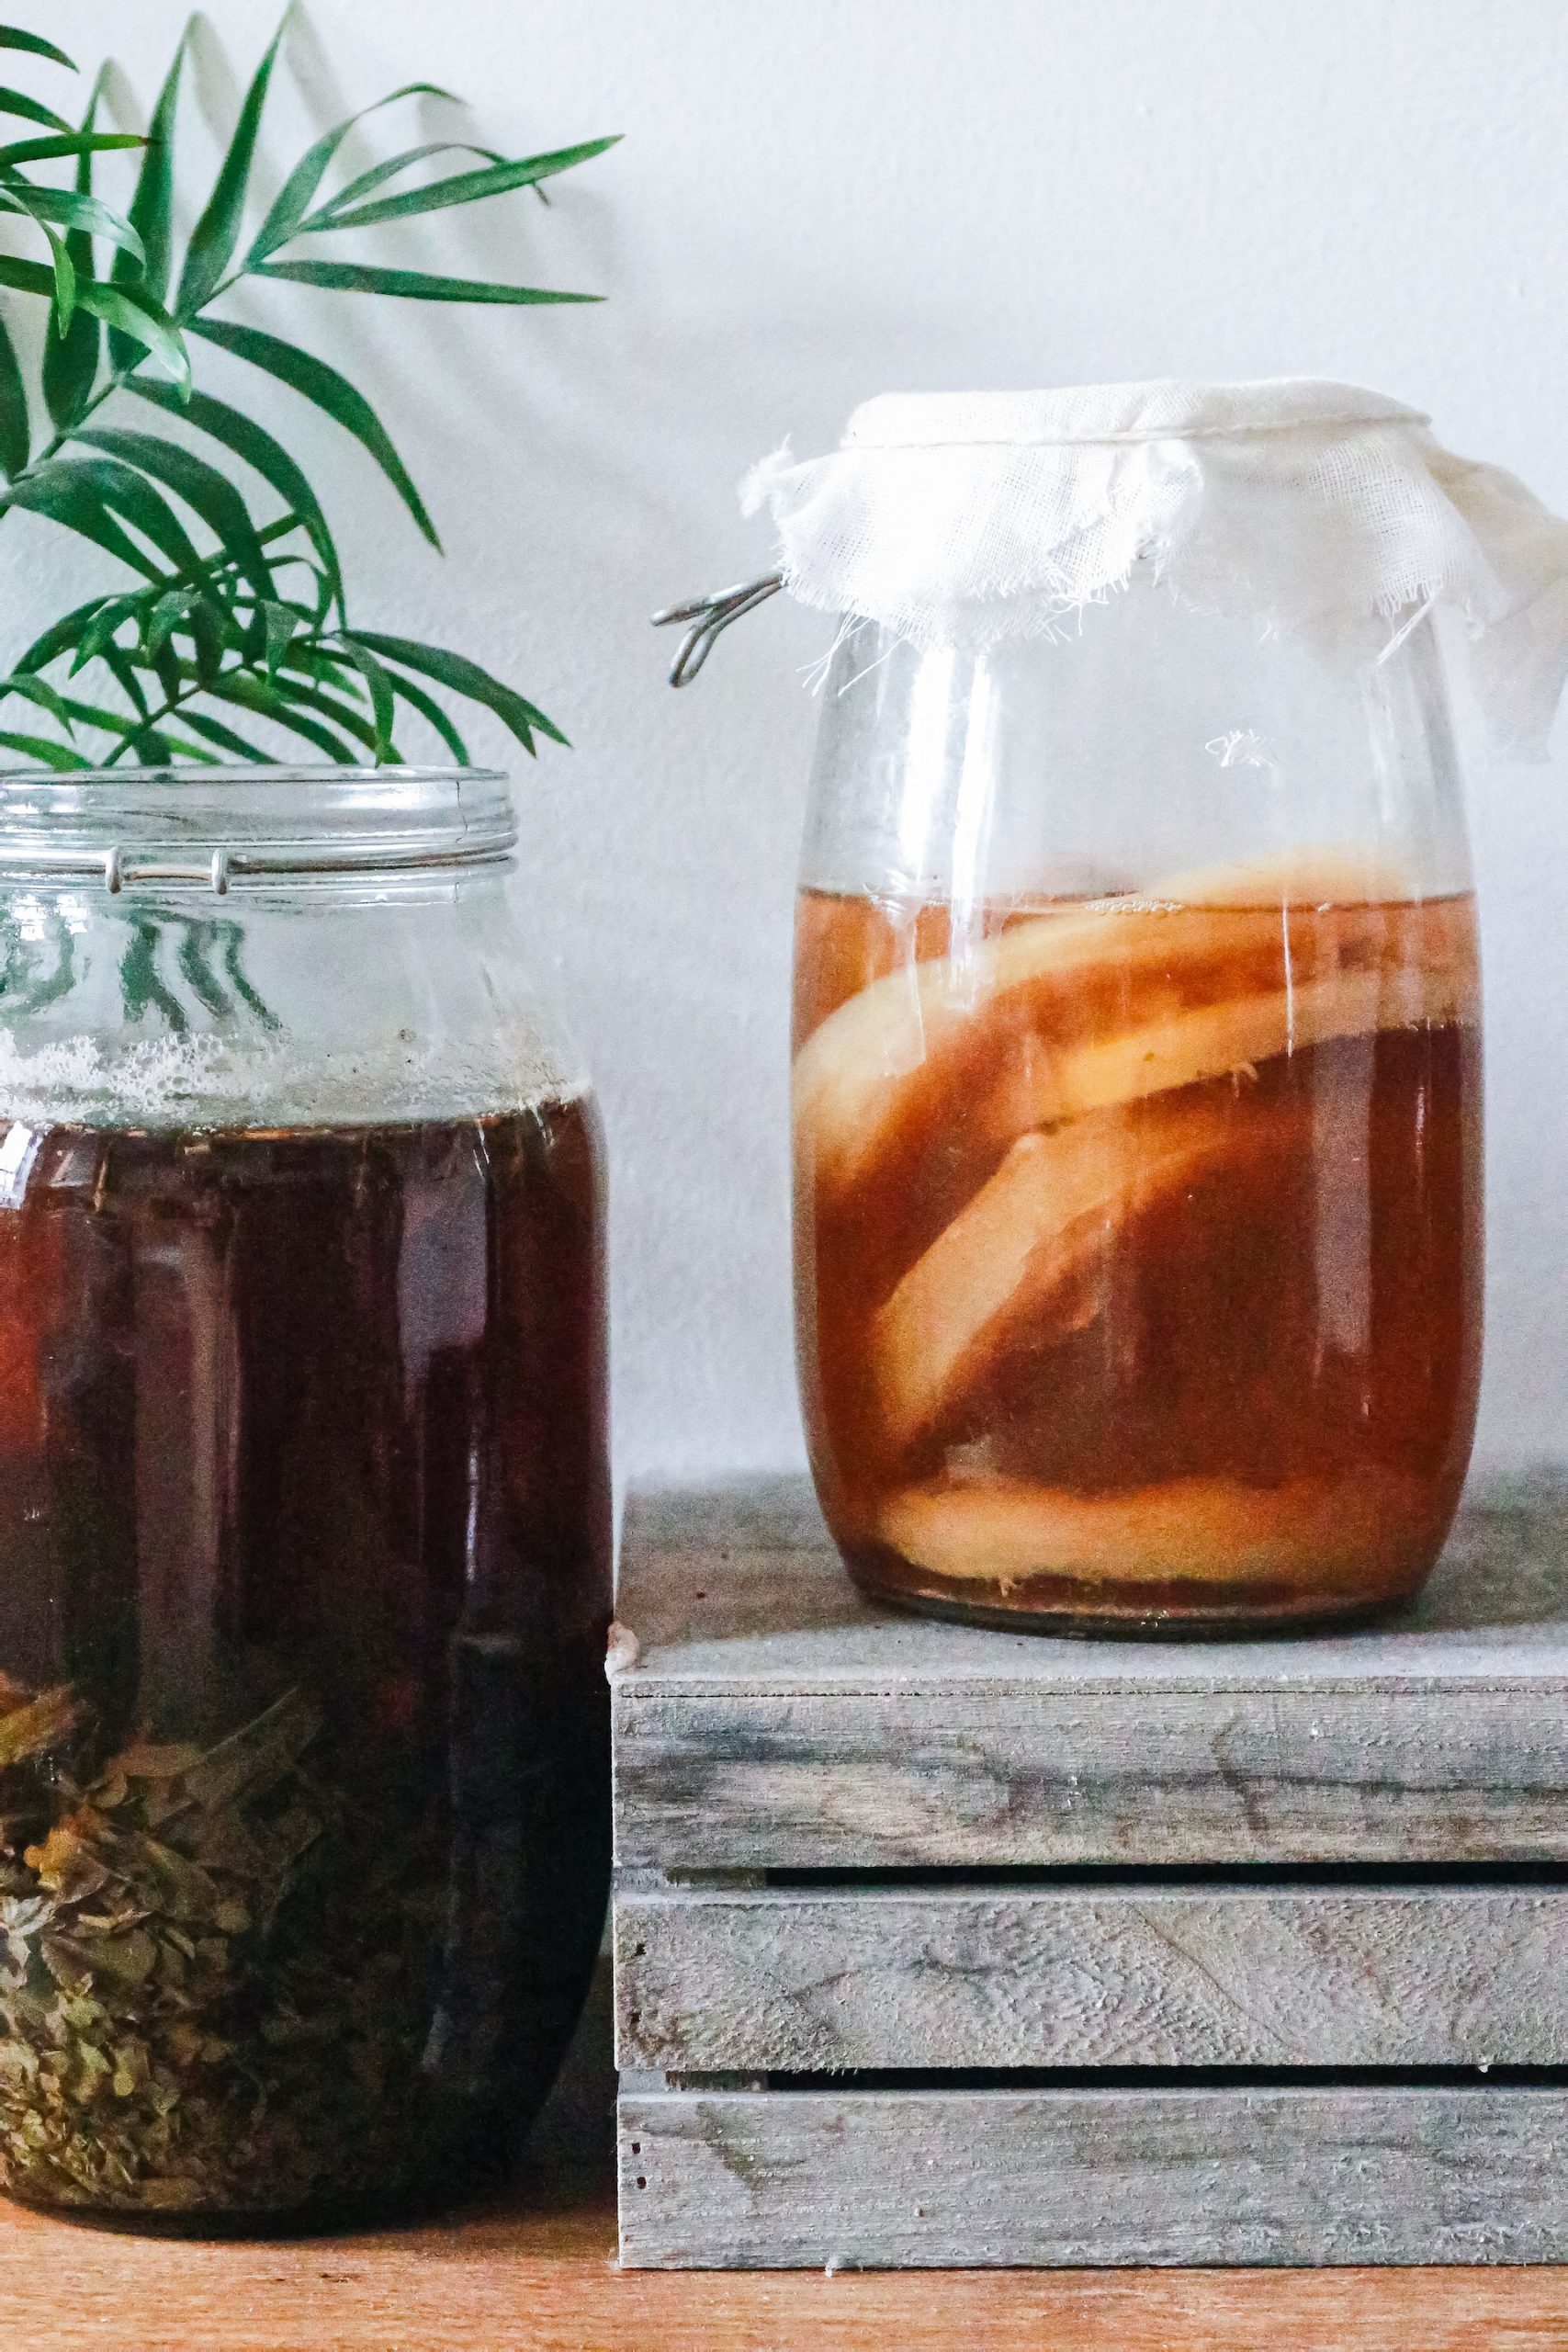 Drink Kombucha fermented tea when the month comes